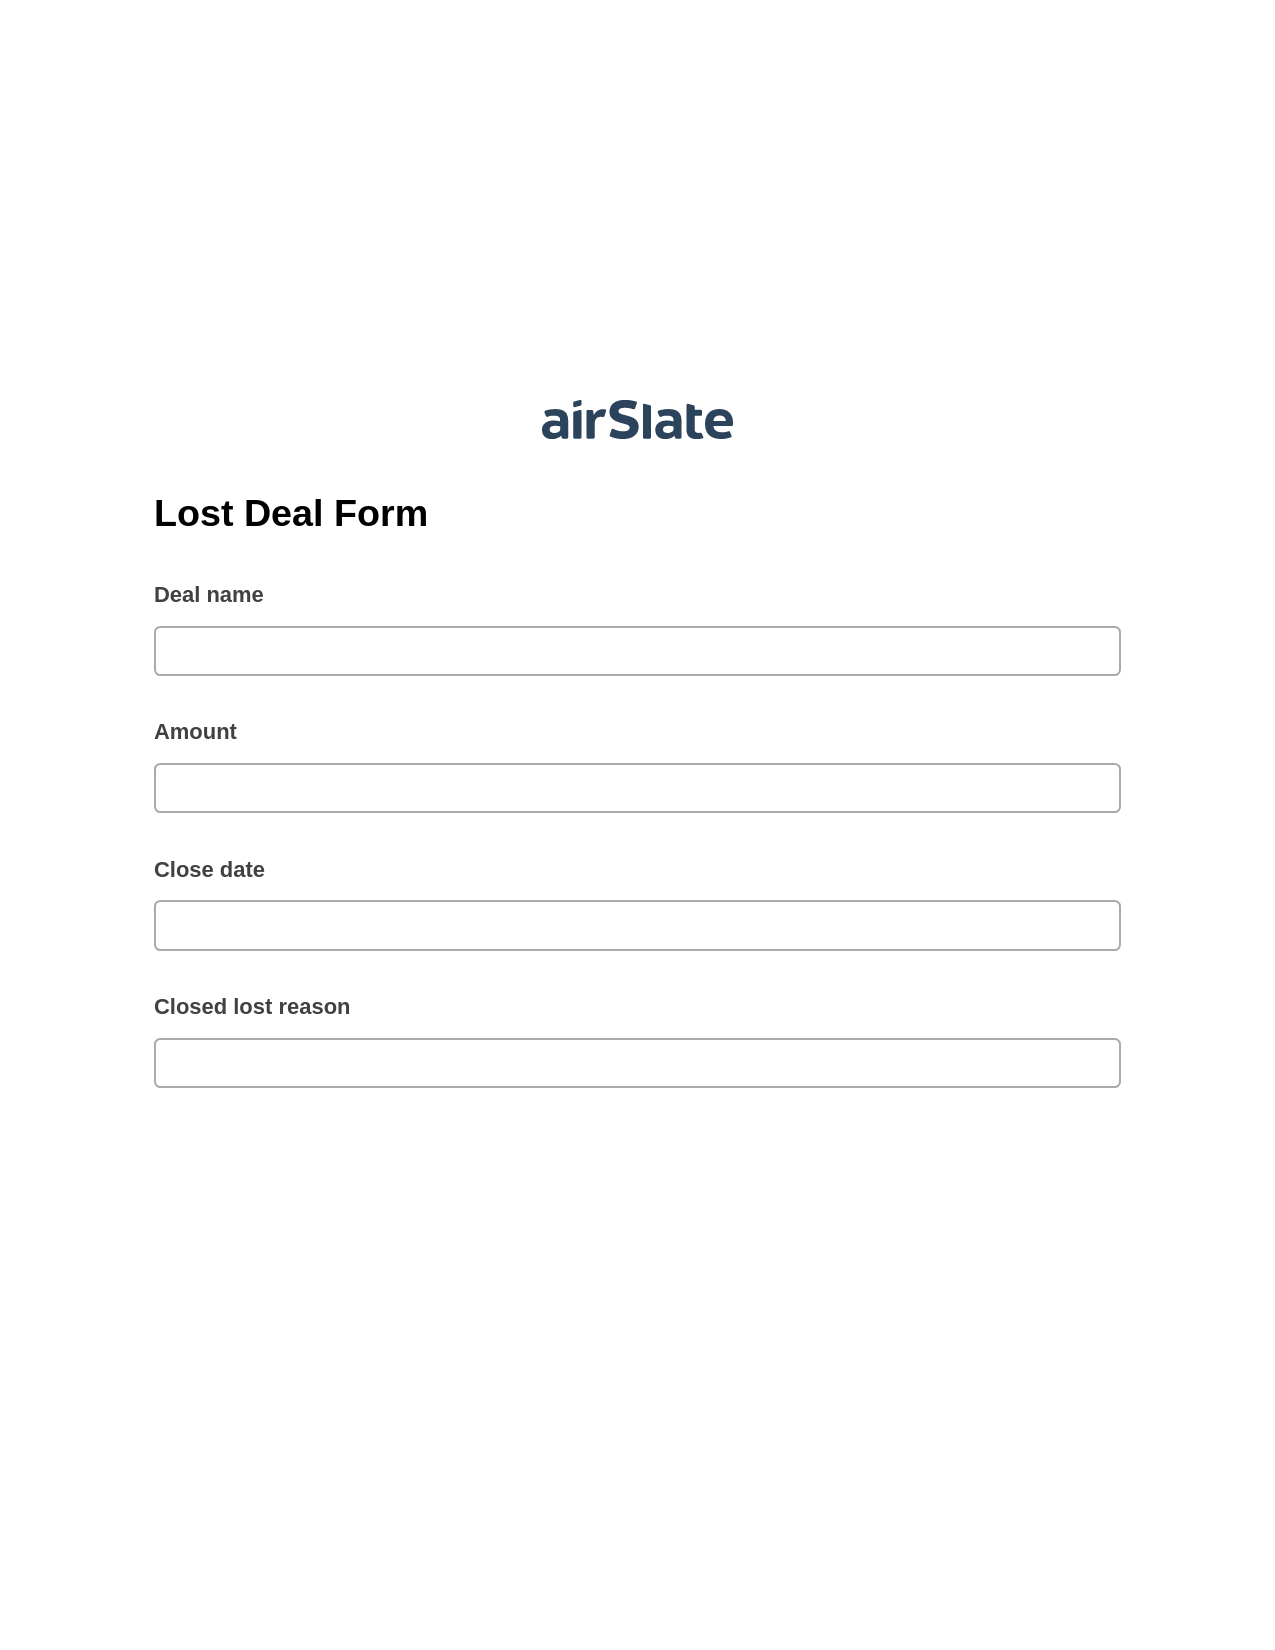 Lost Deal Form Prefill from NetSuite records, Reminder Bot, Export to Smartsheet